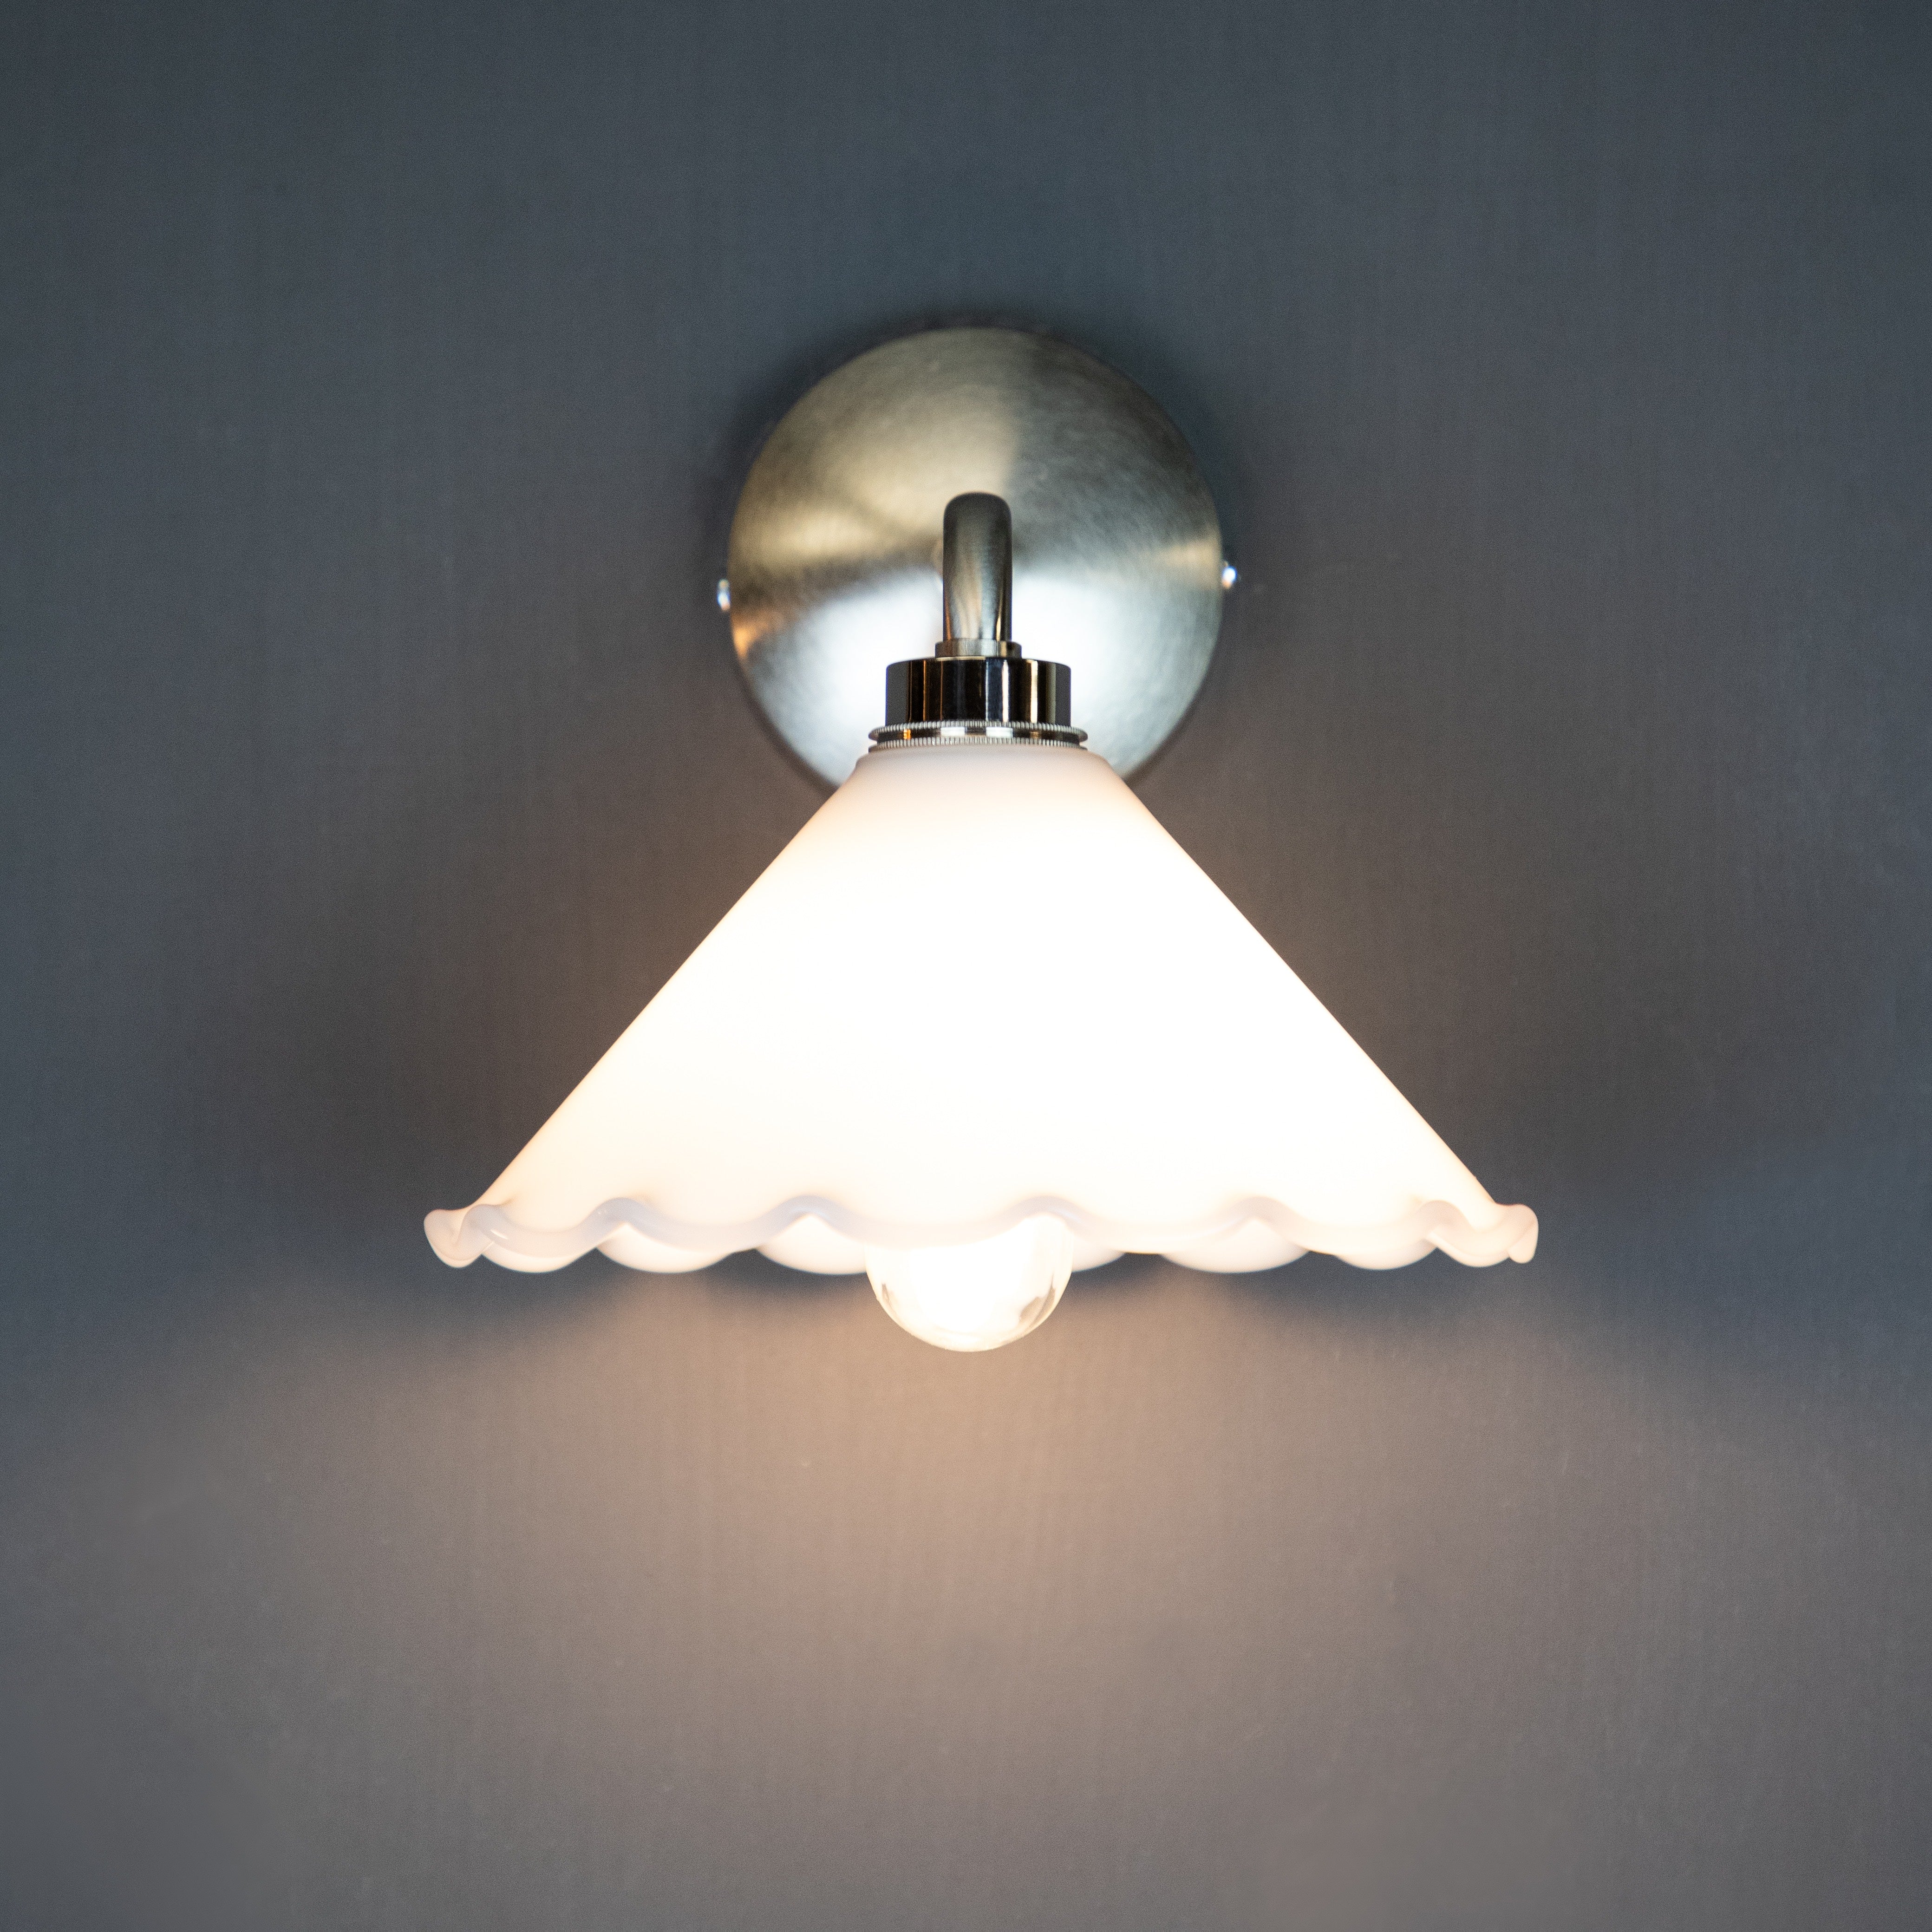 The launch of our IP44 bathroom wall light collection